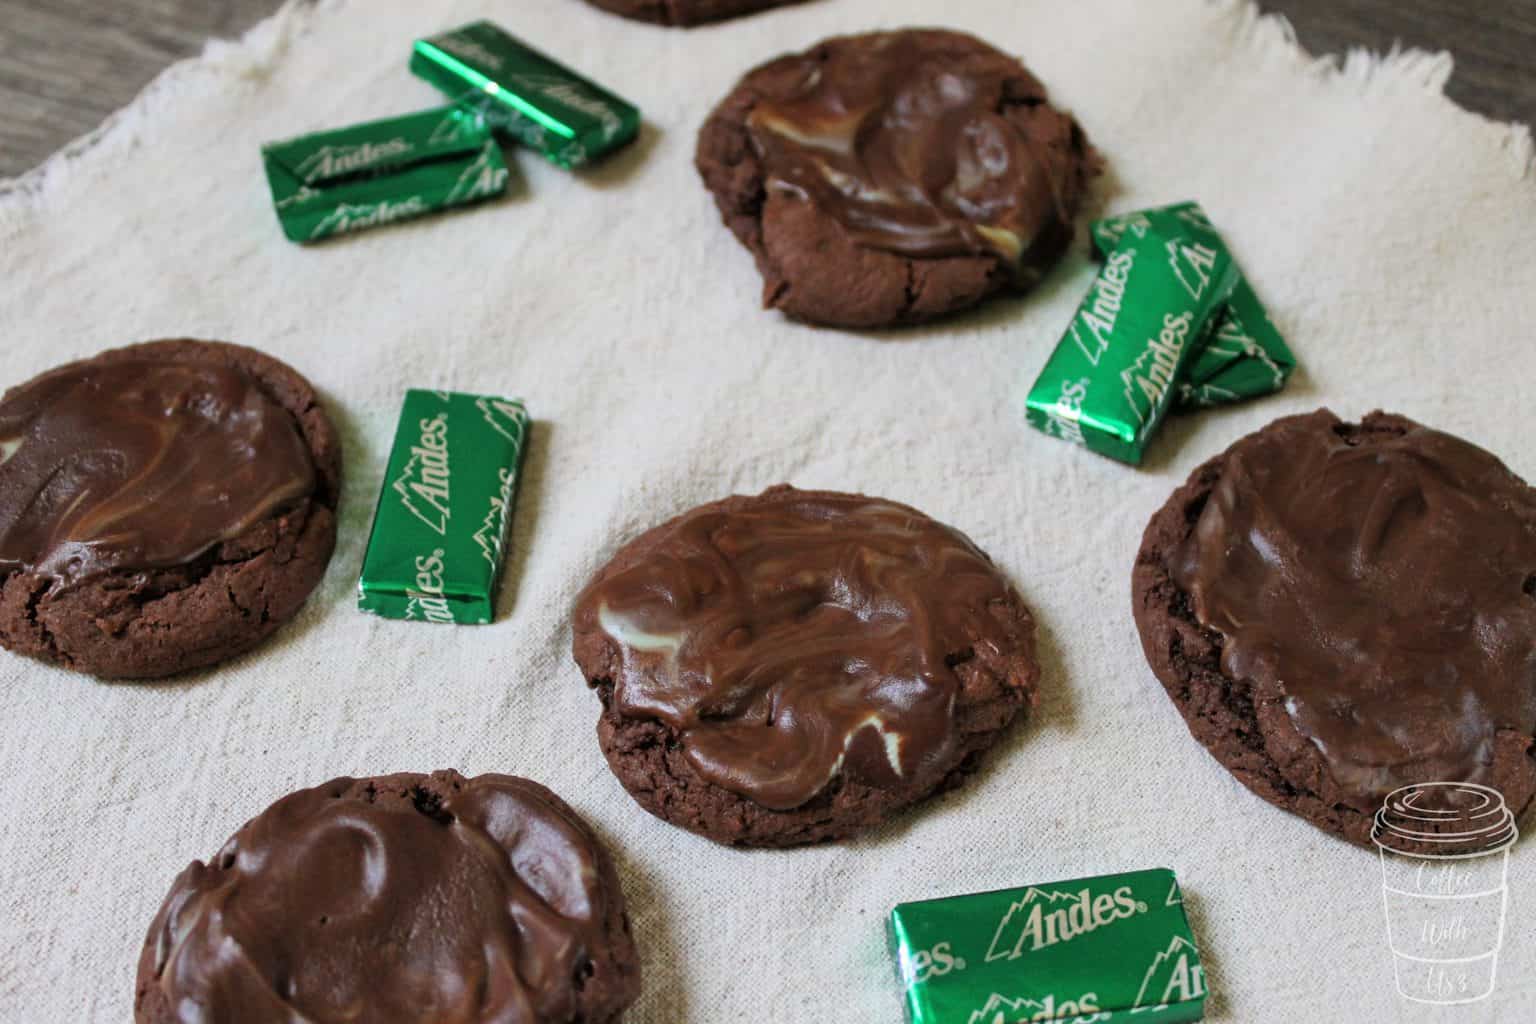 Mint Chocolate Cake Mix Cookies scattered with Andes mints on a cream placemat